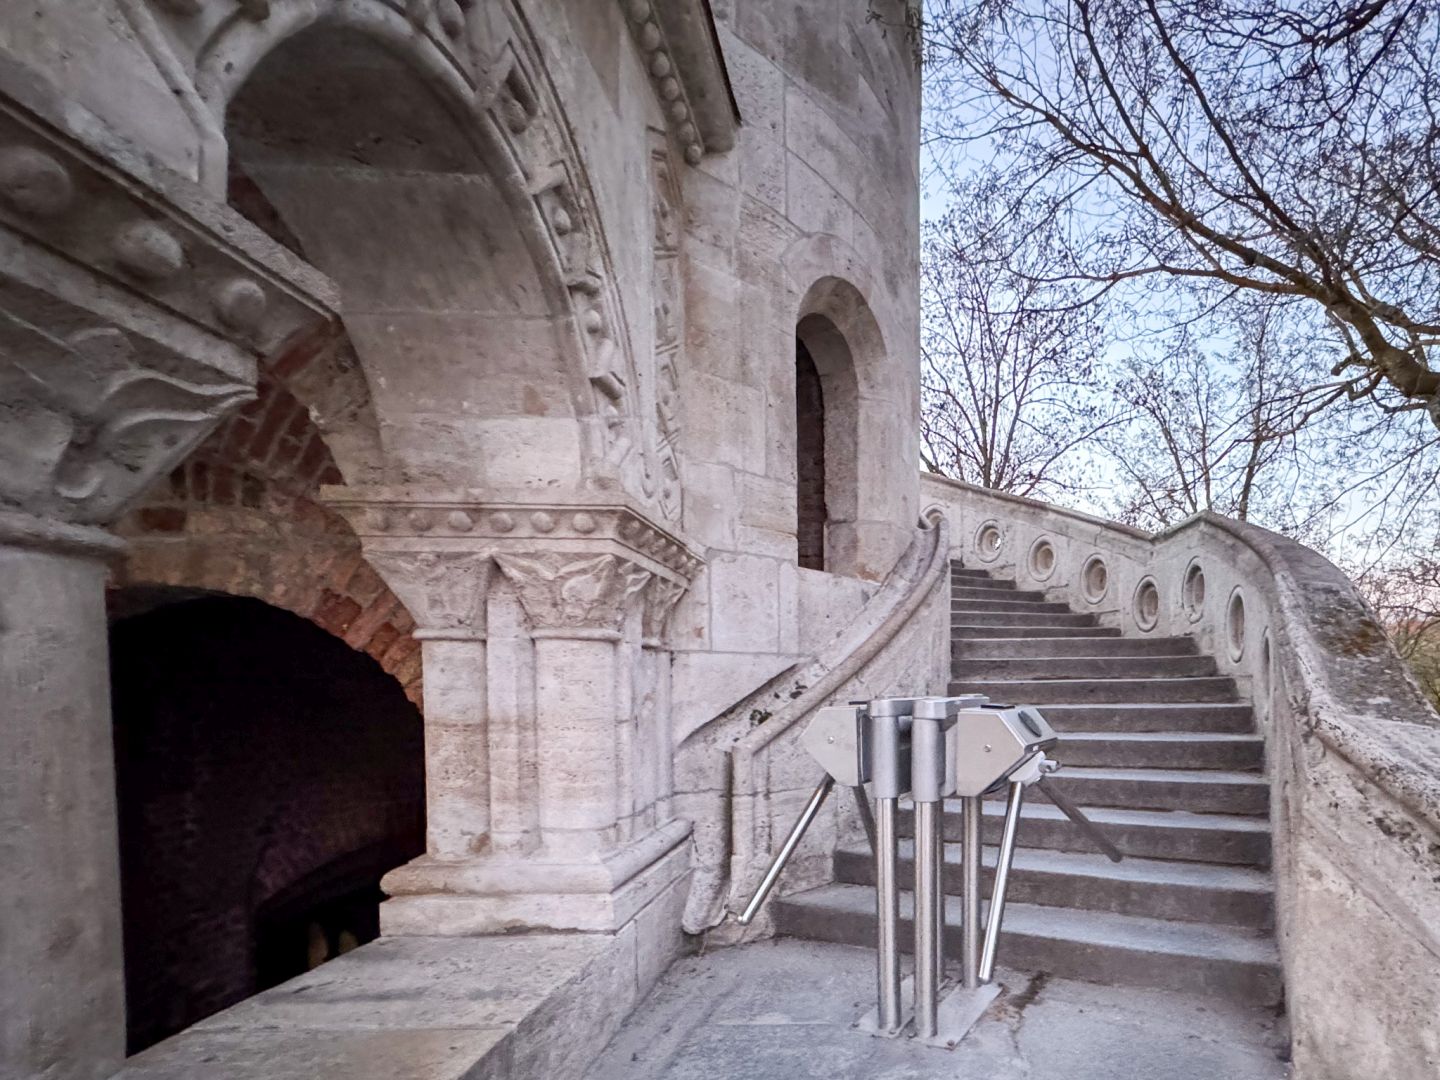 A ticket is required to access the upper terraces of Fisherman's Bastion.